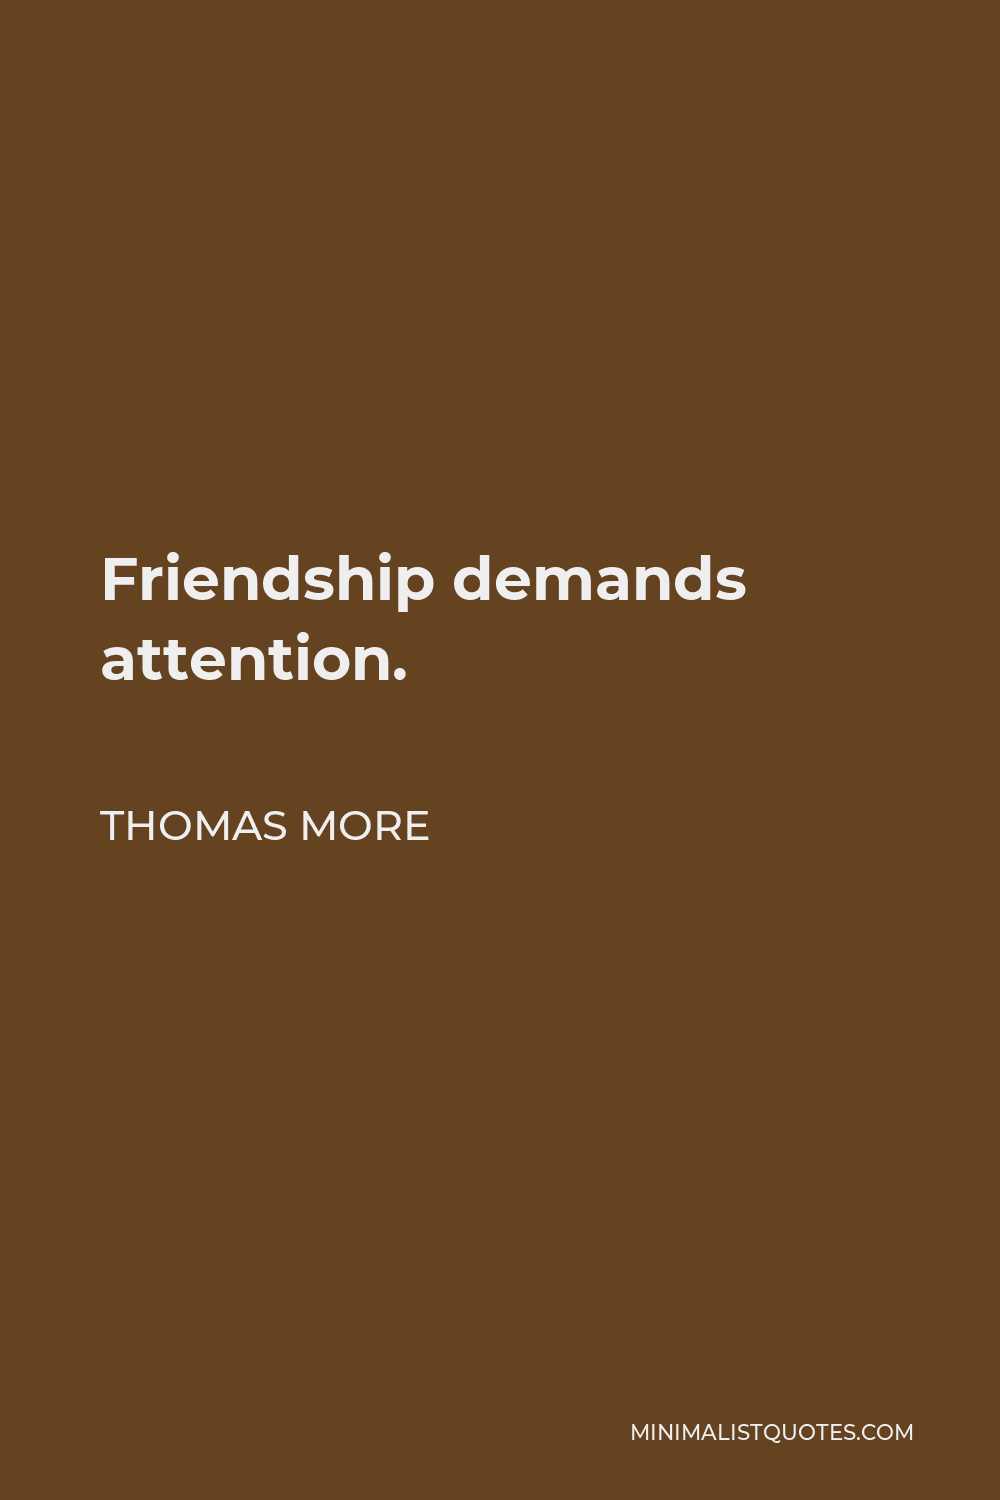 Thomas More Quote - Friendship demands attention.